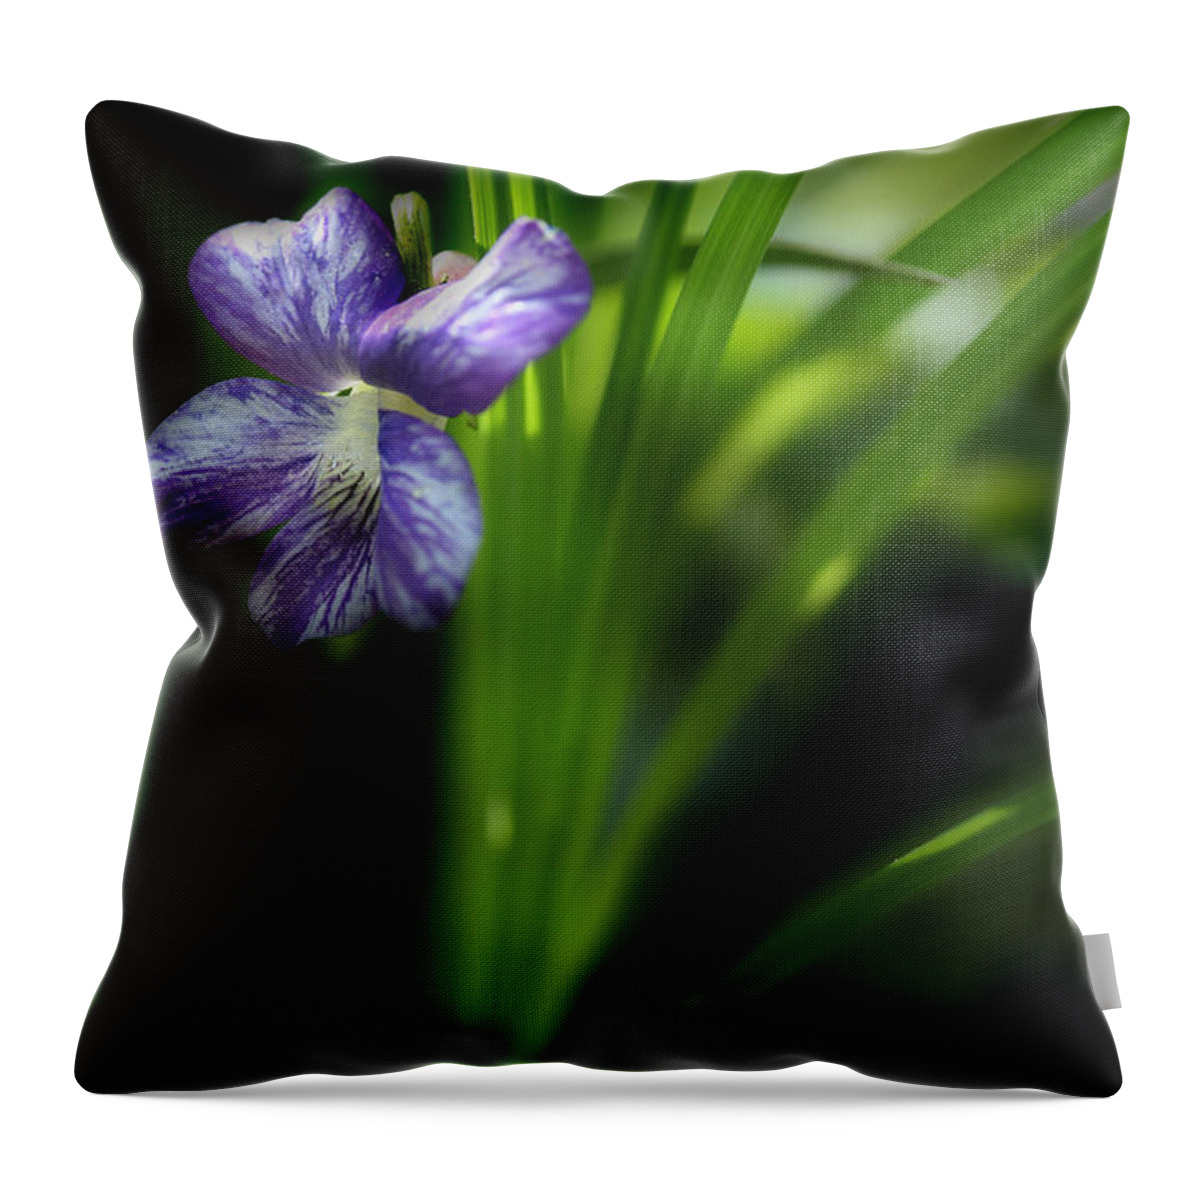 Purple Violet Throw Pillow featuring the photograph One Fine Morning by Michael Eingle